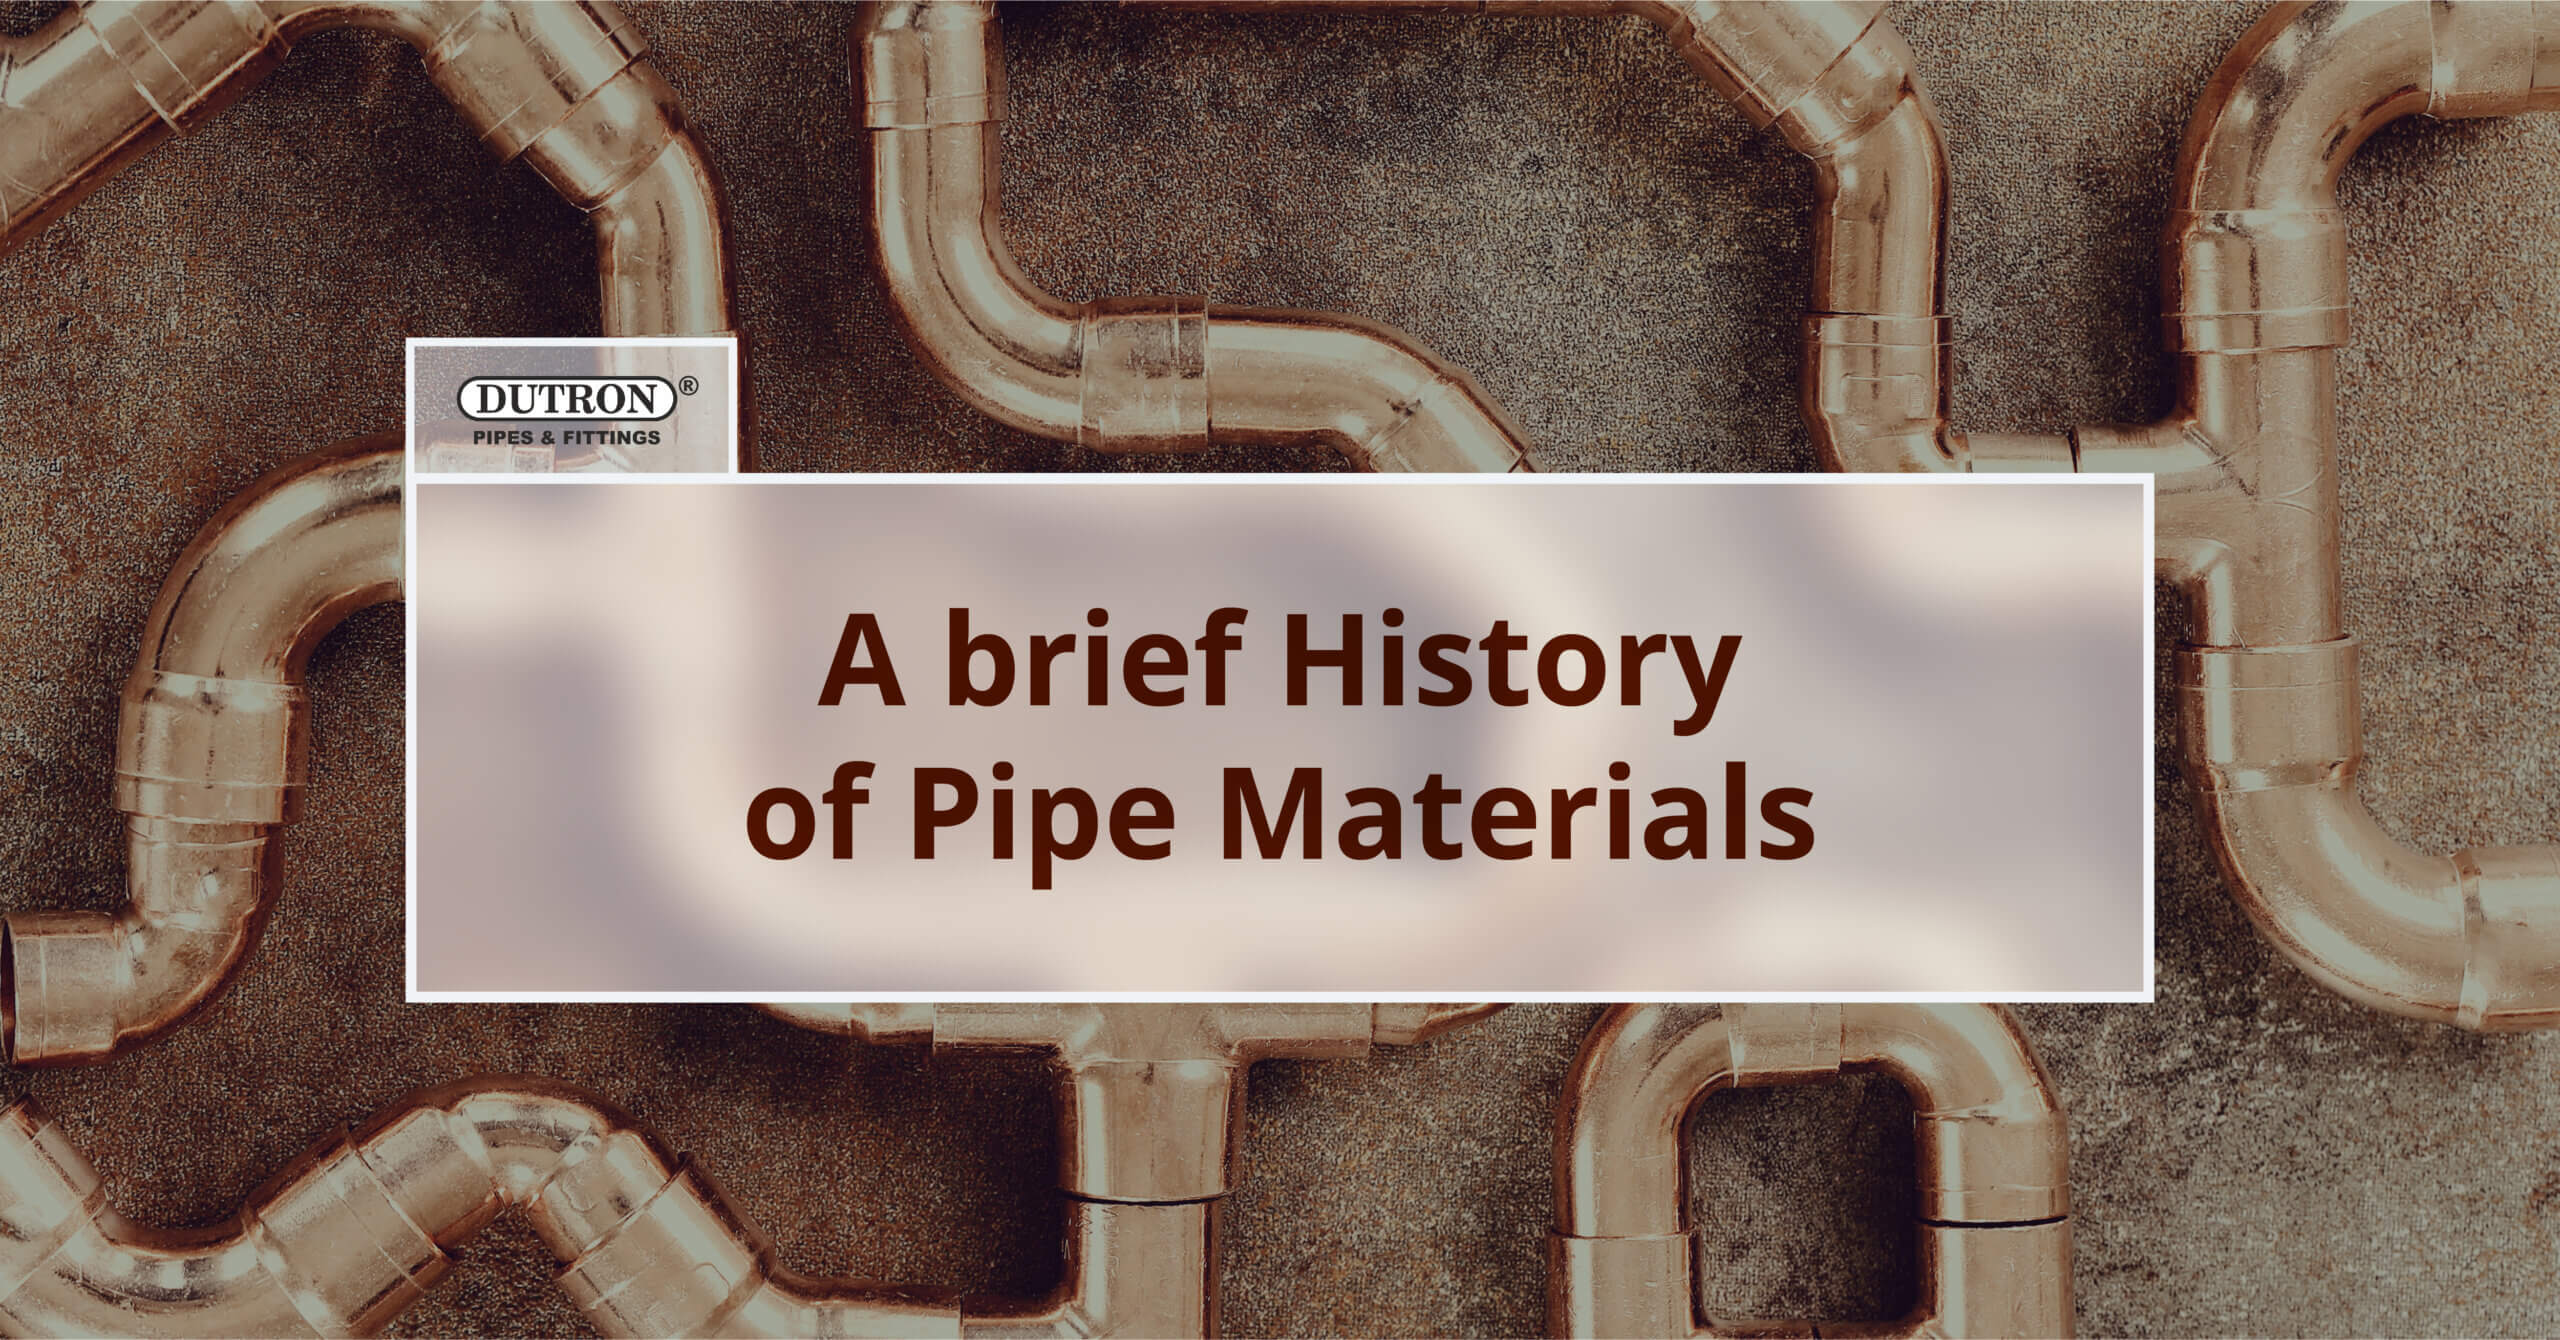 History of Pipe Materials